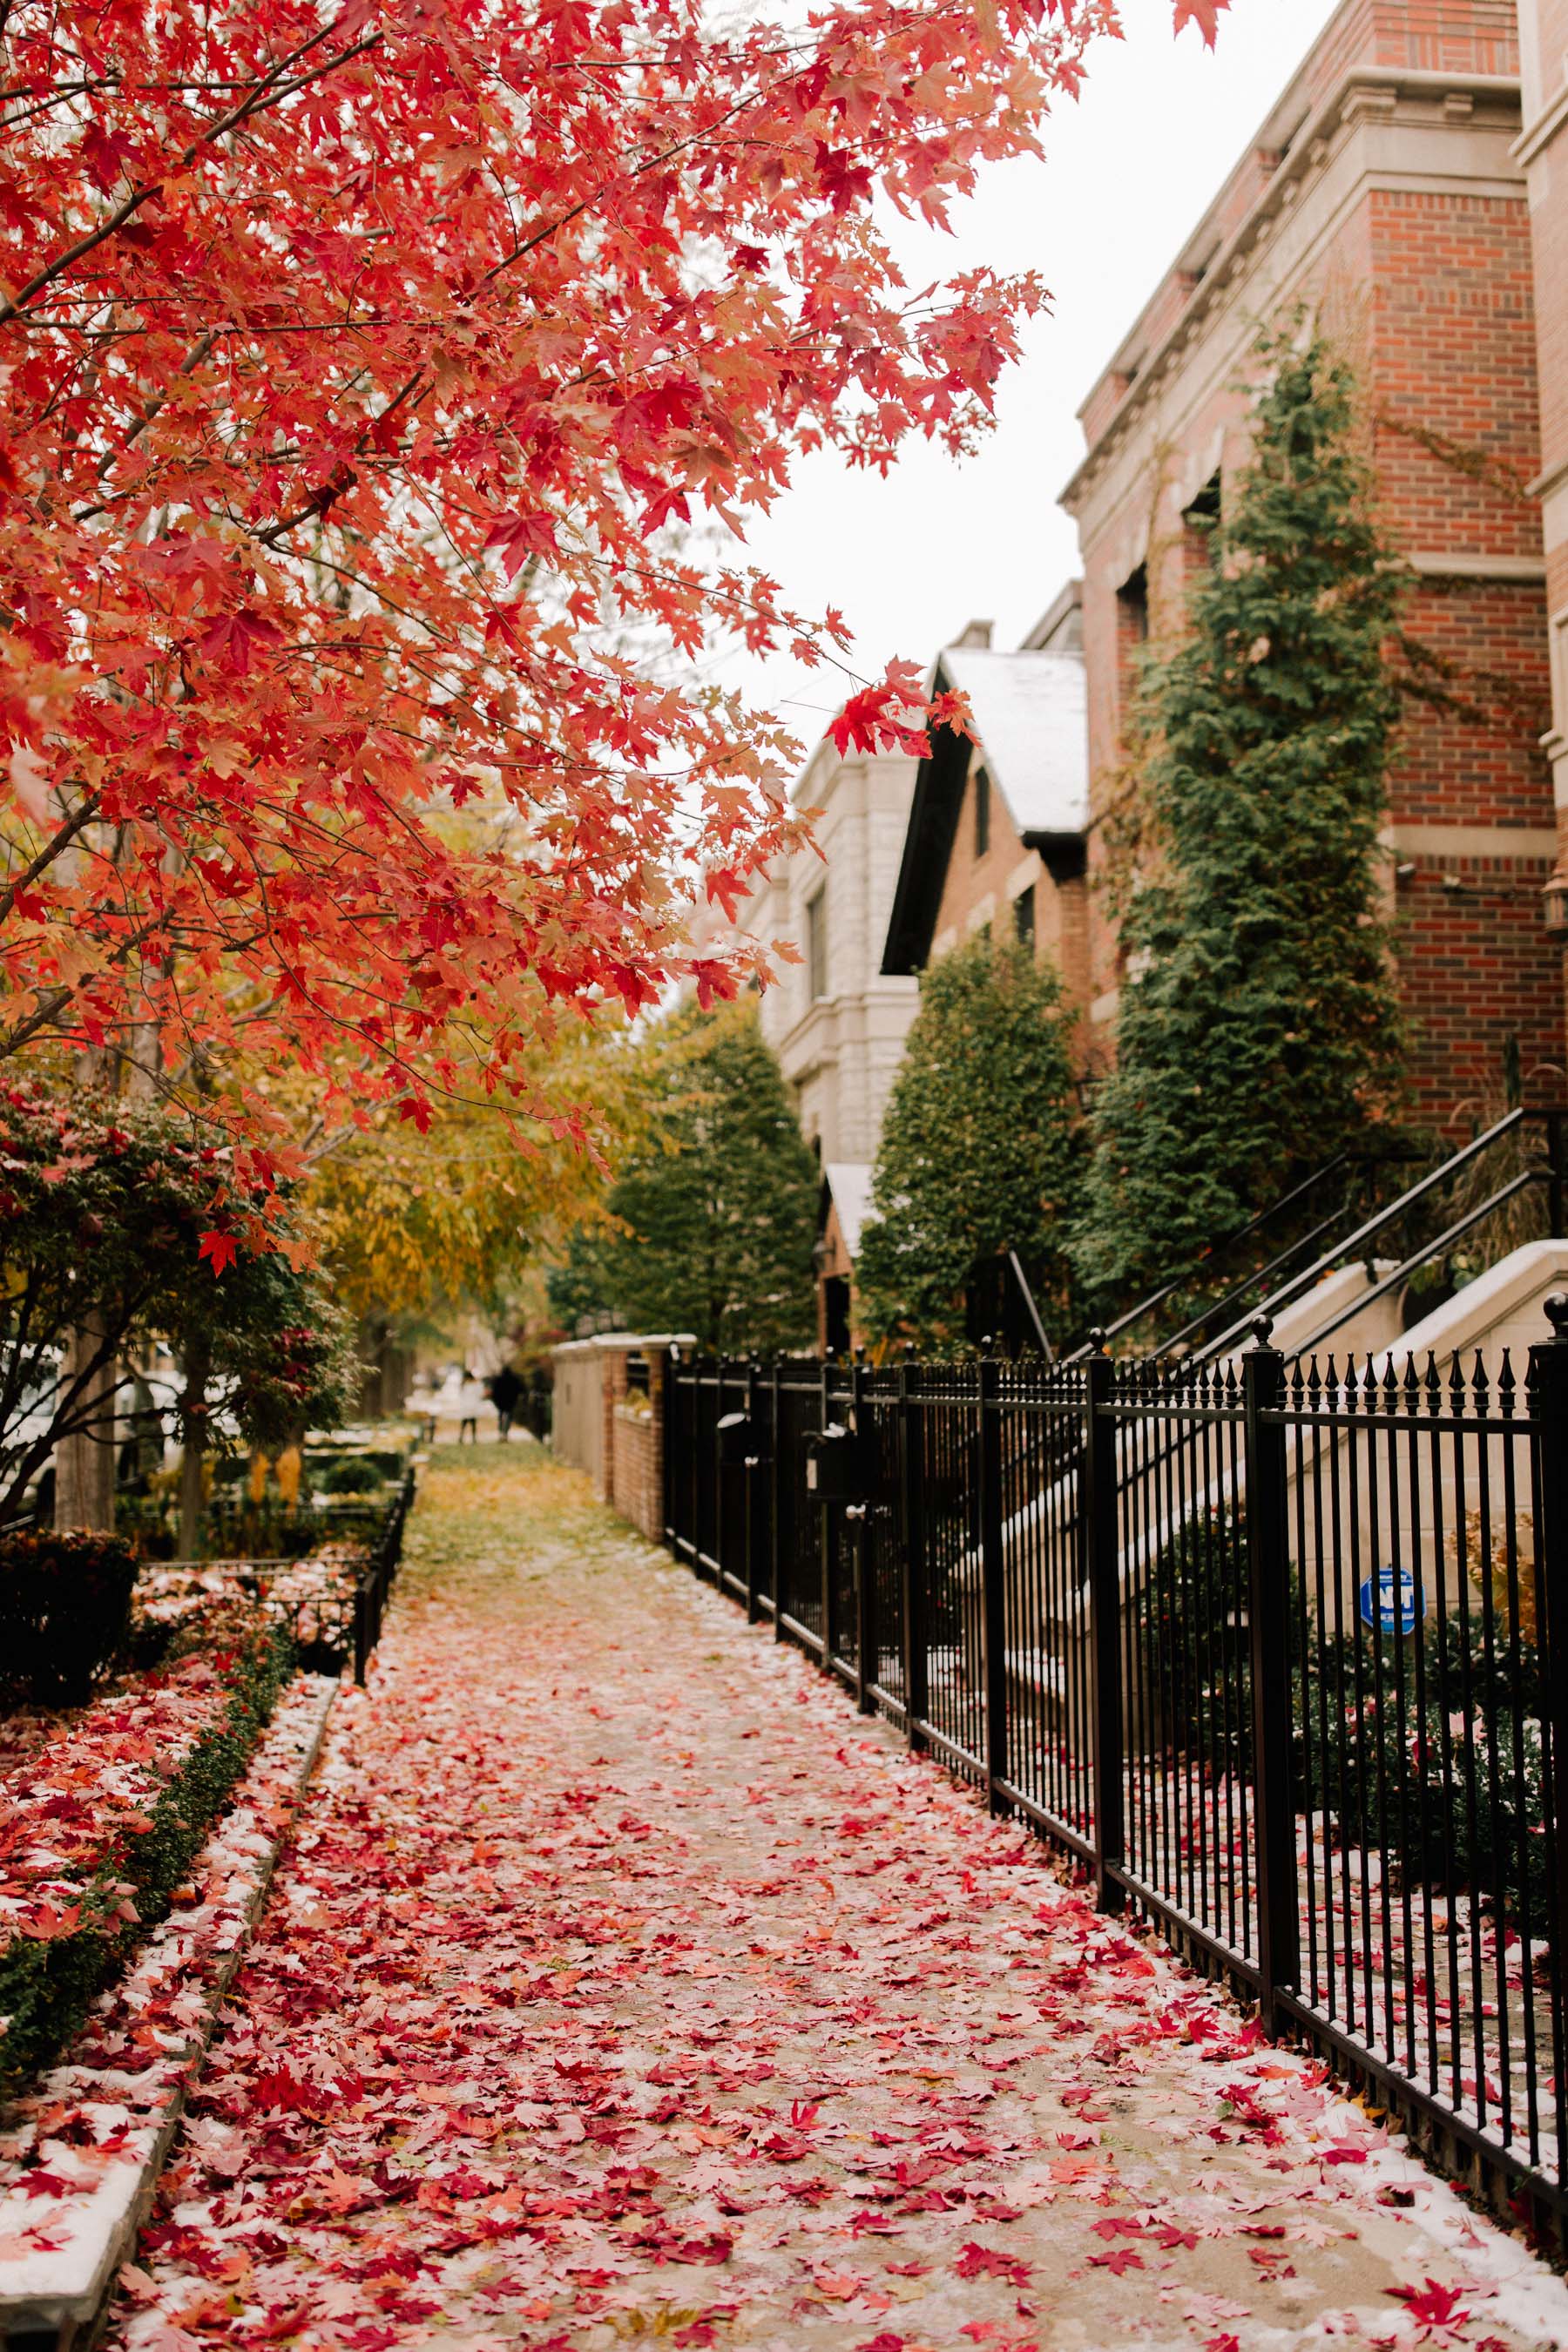 Autumn leaves in Chicago